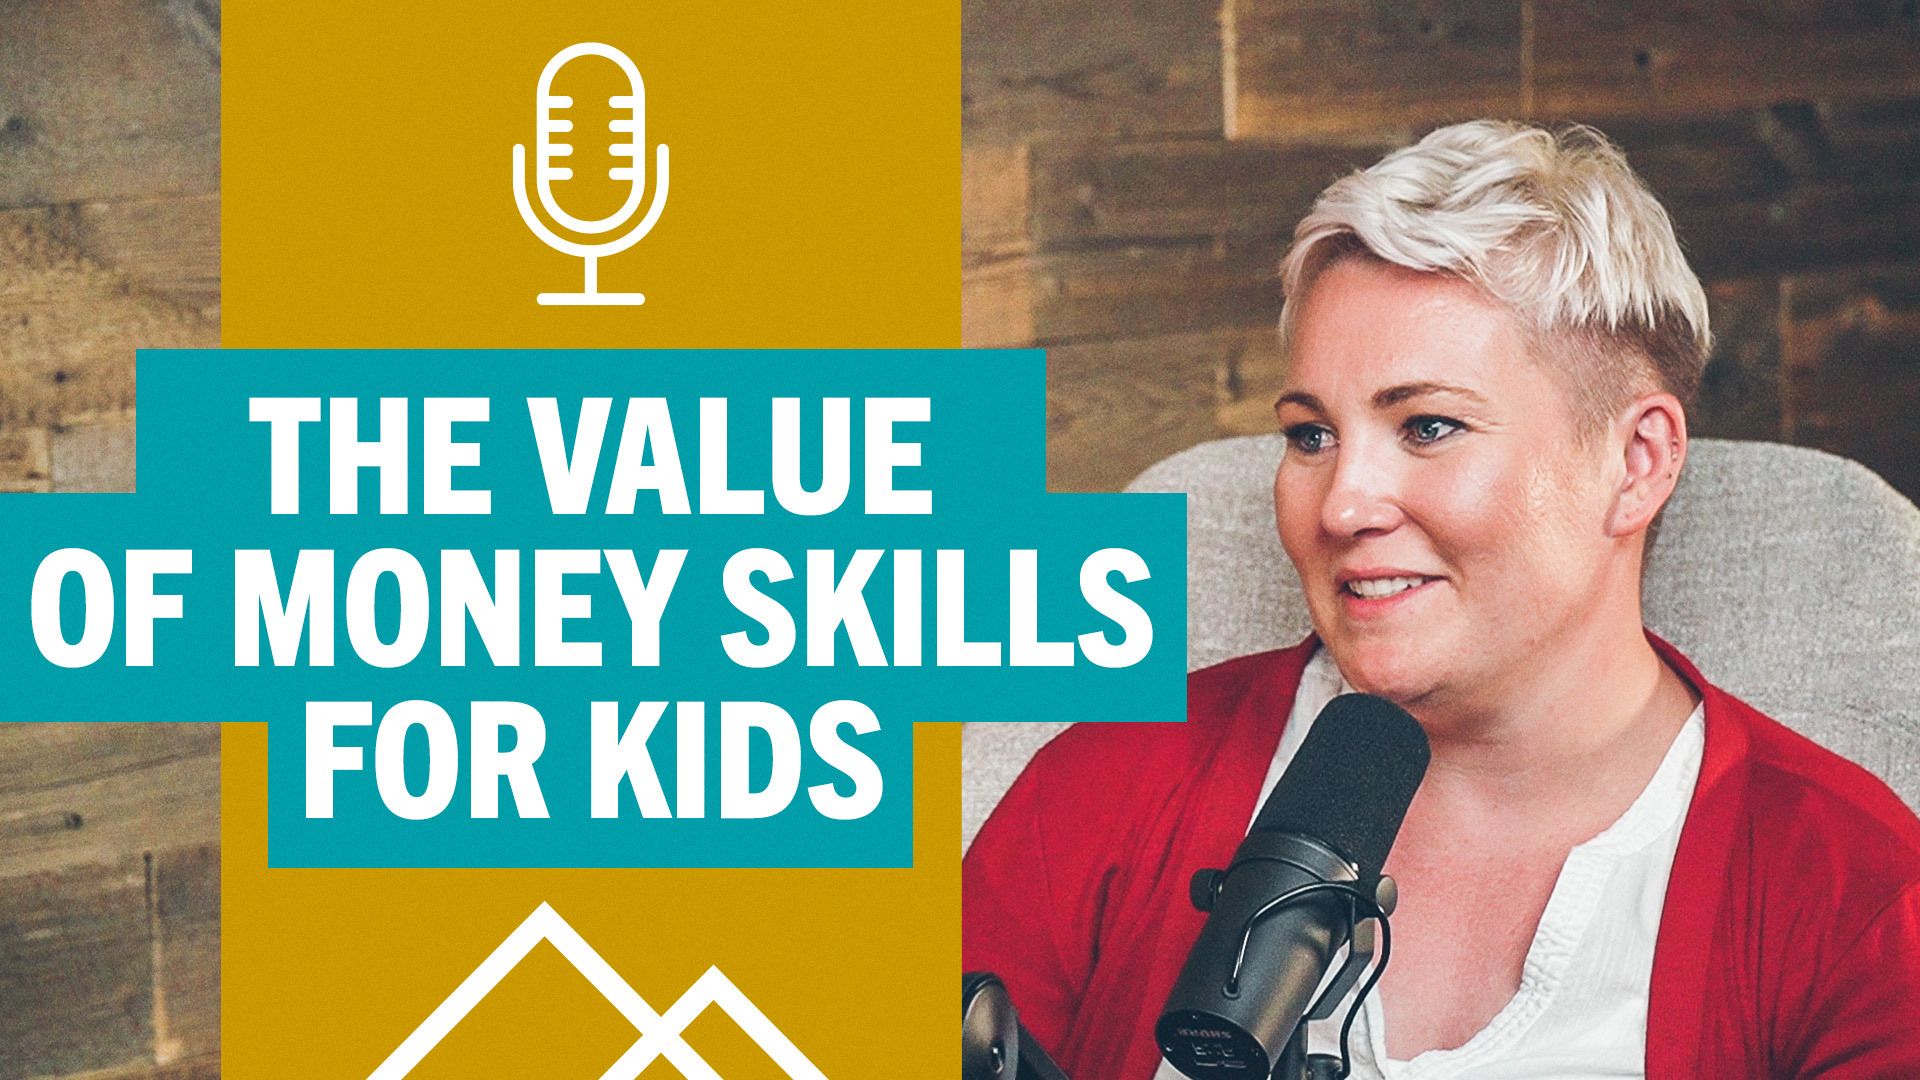 woman in red sweater at podcast mike. "The value of money skills for kids."